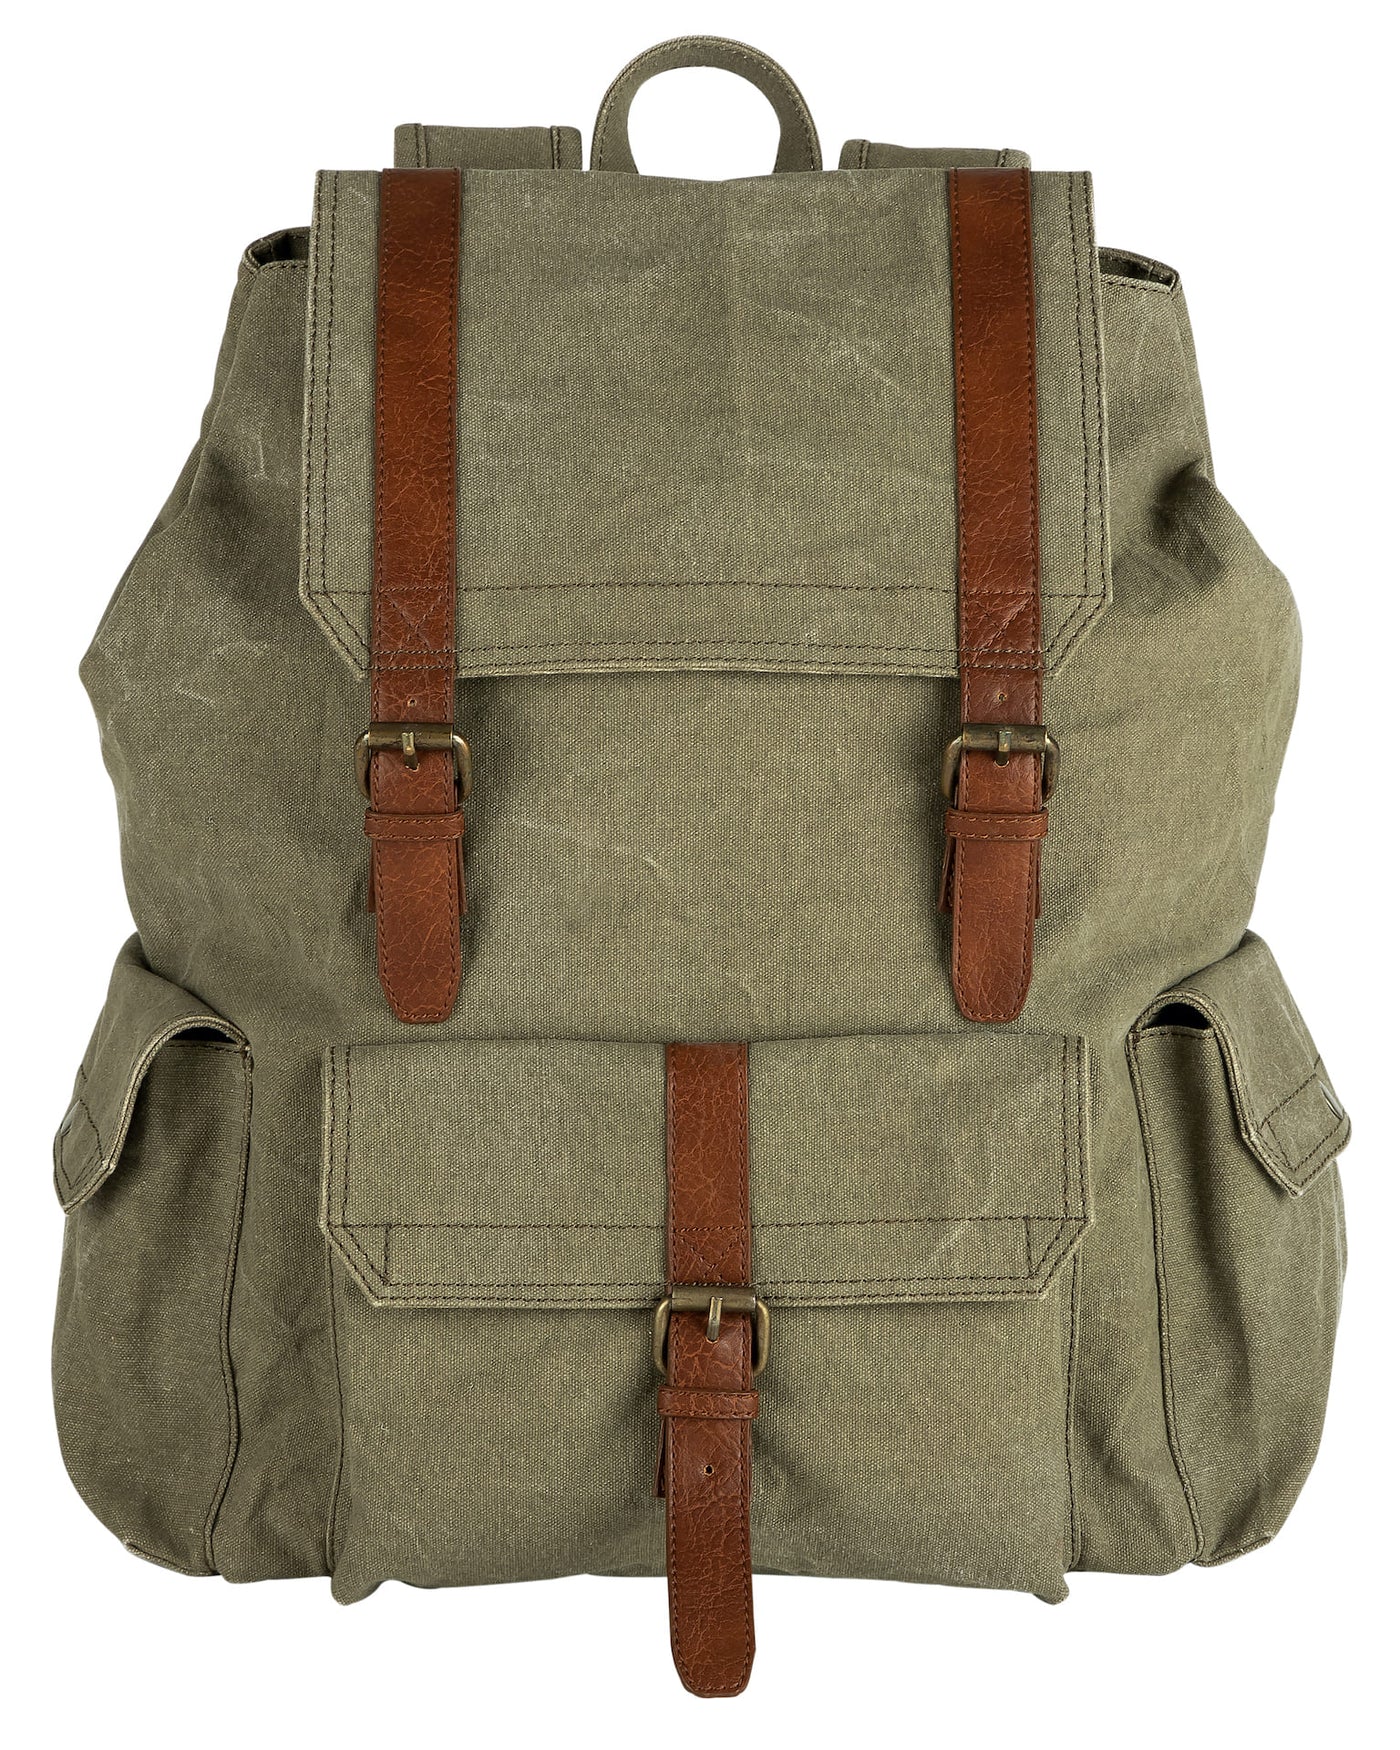 Mona B - moss 100% cotton canvas back pack for offices schools and colleges with 14" laptop sleeve and stylish design